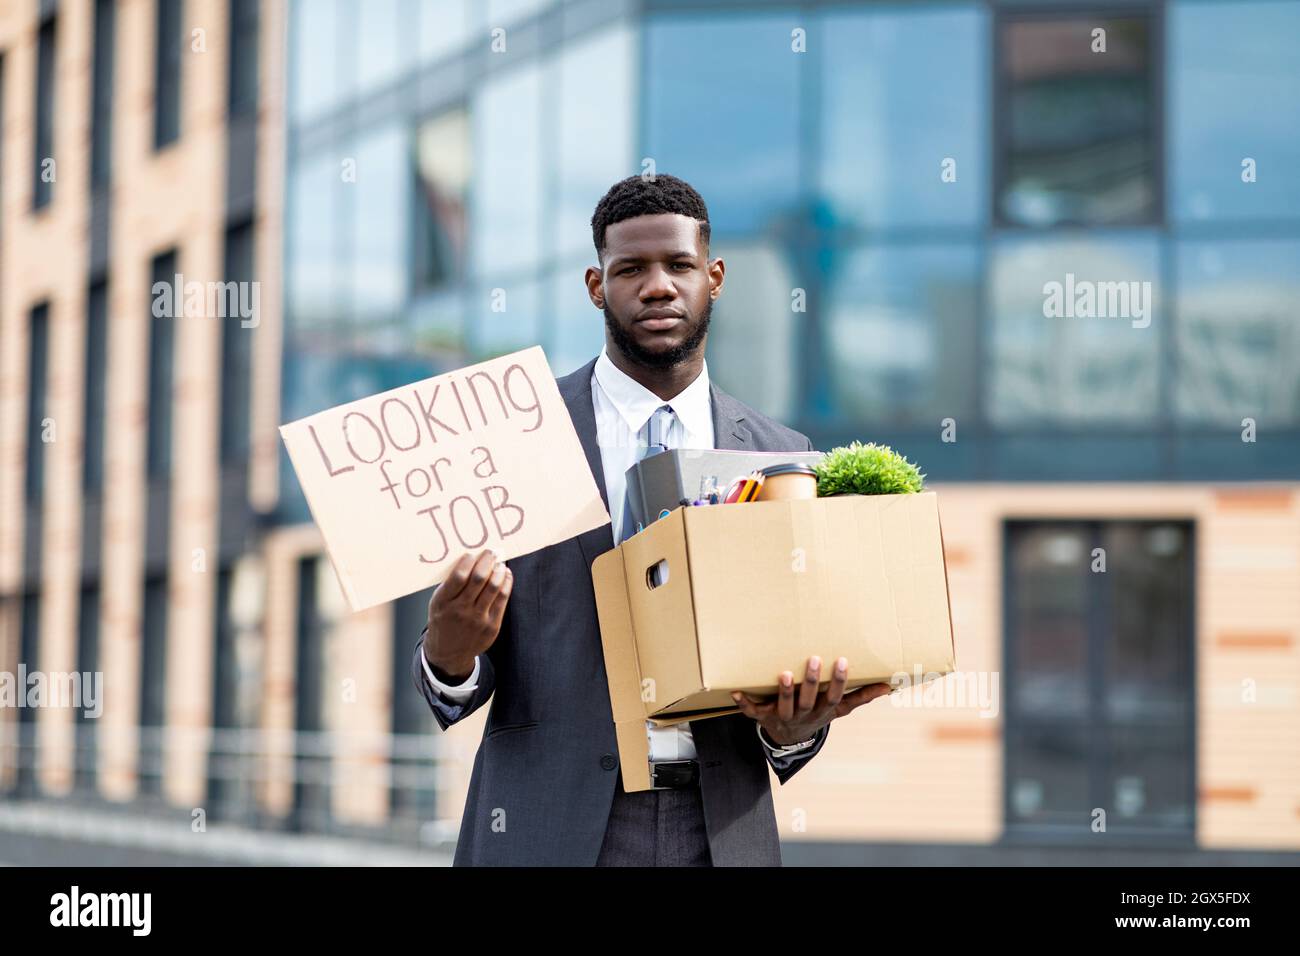 Looking for a job. Upset black businessman with box of personal stuff and poster, got fired, standing outdoors Stock Photo